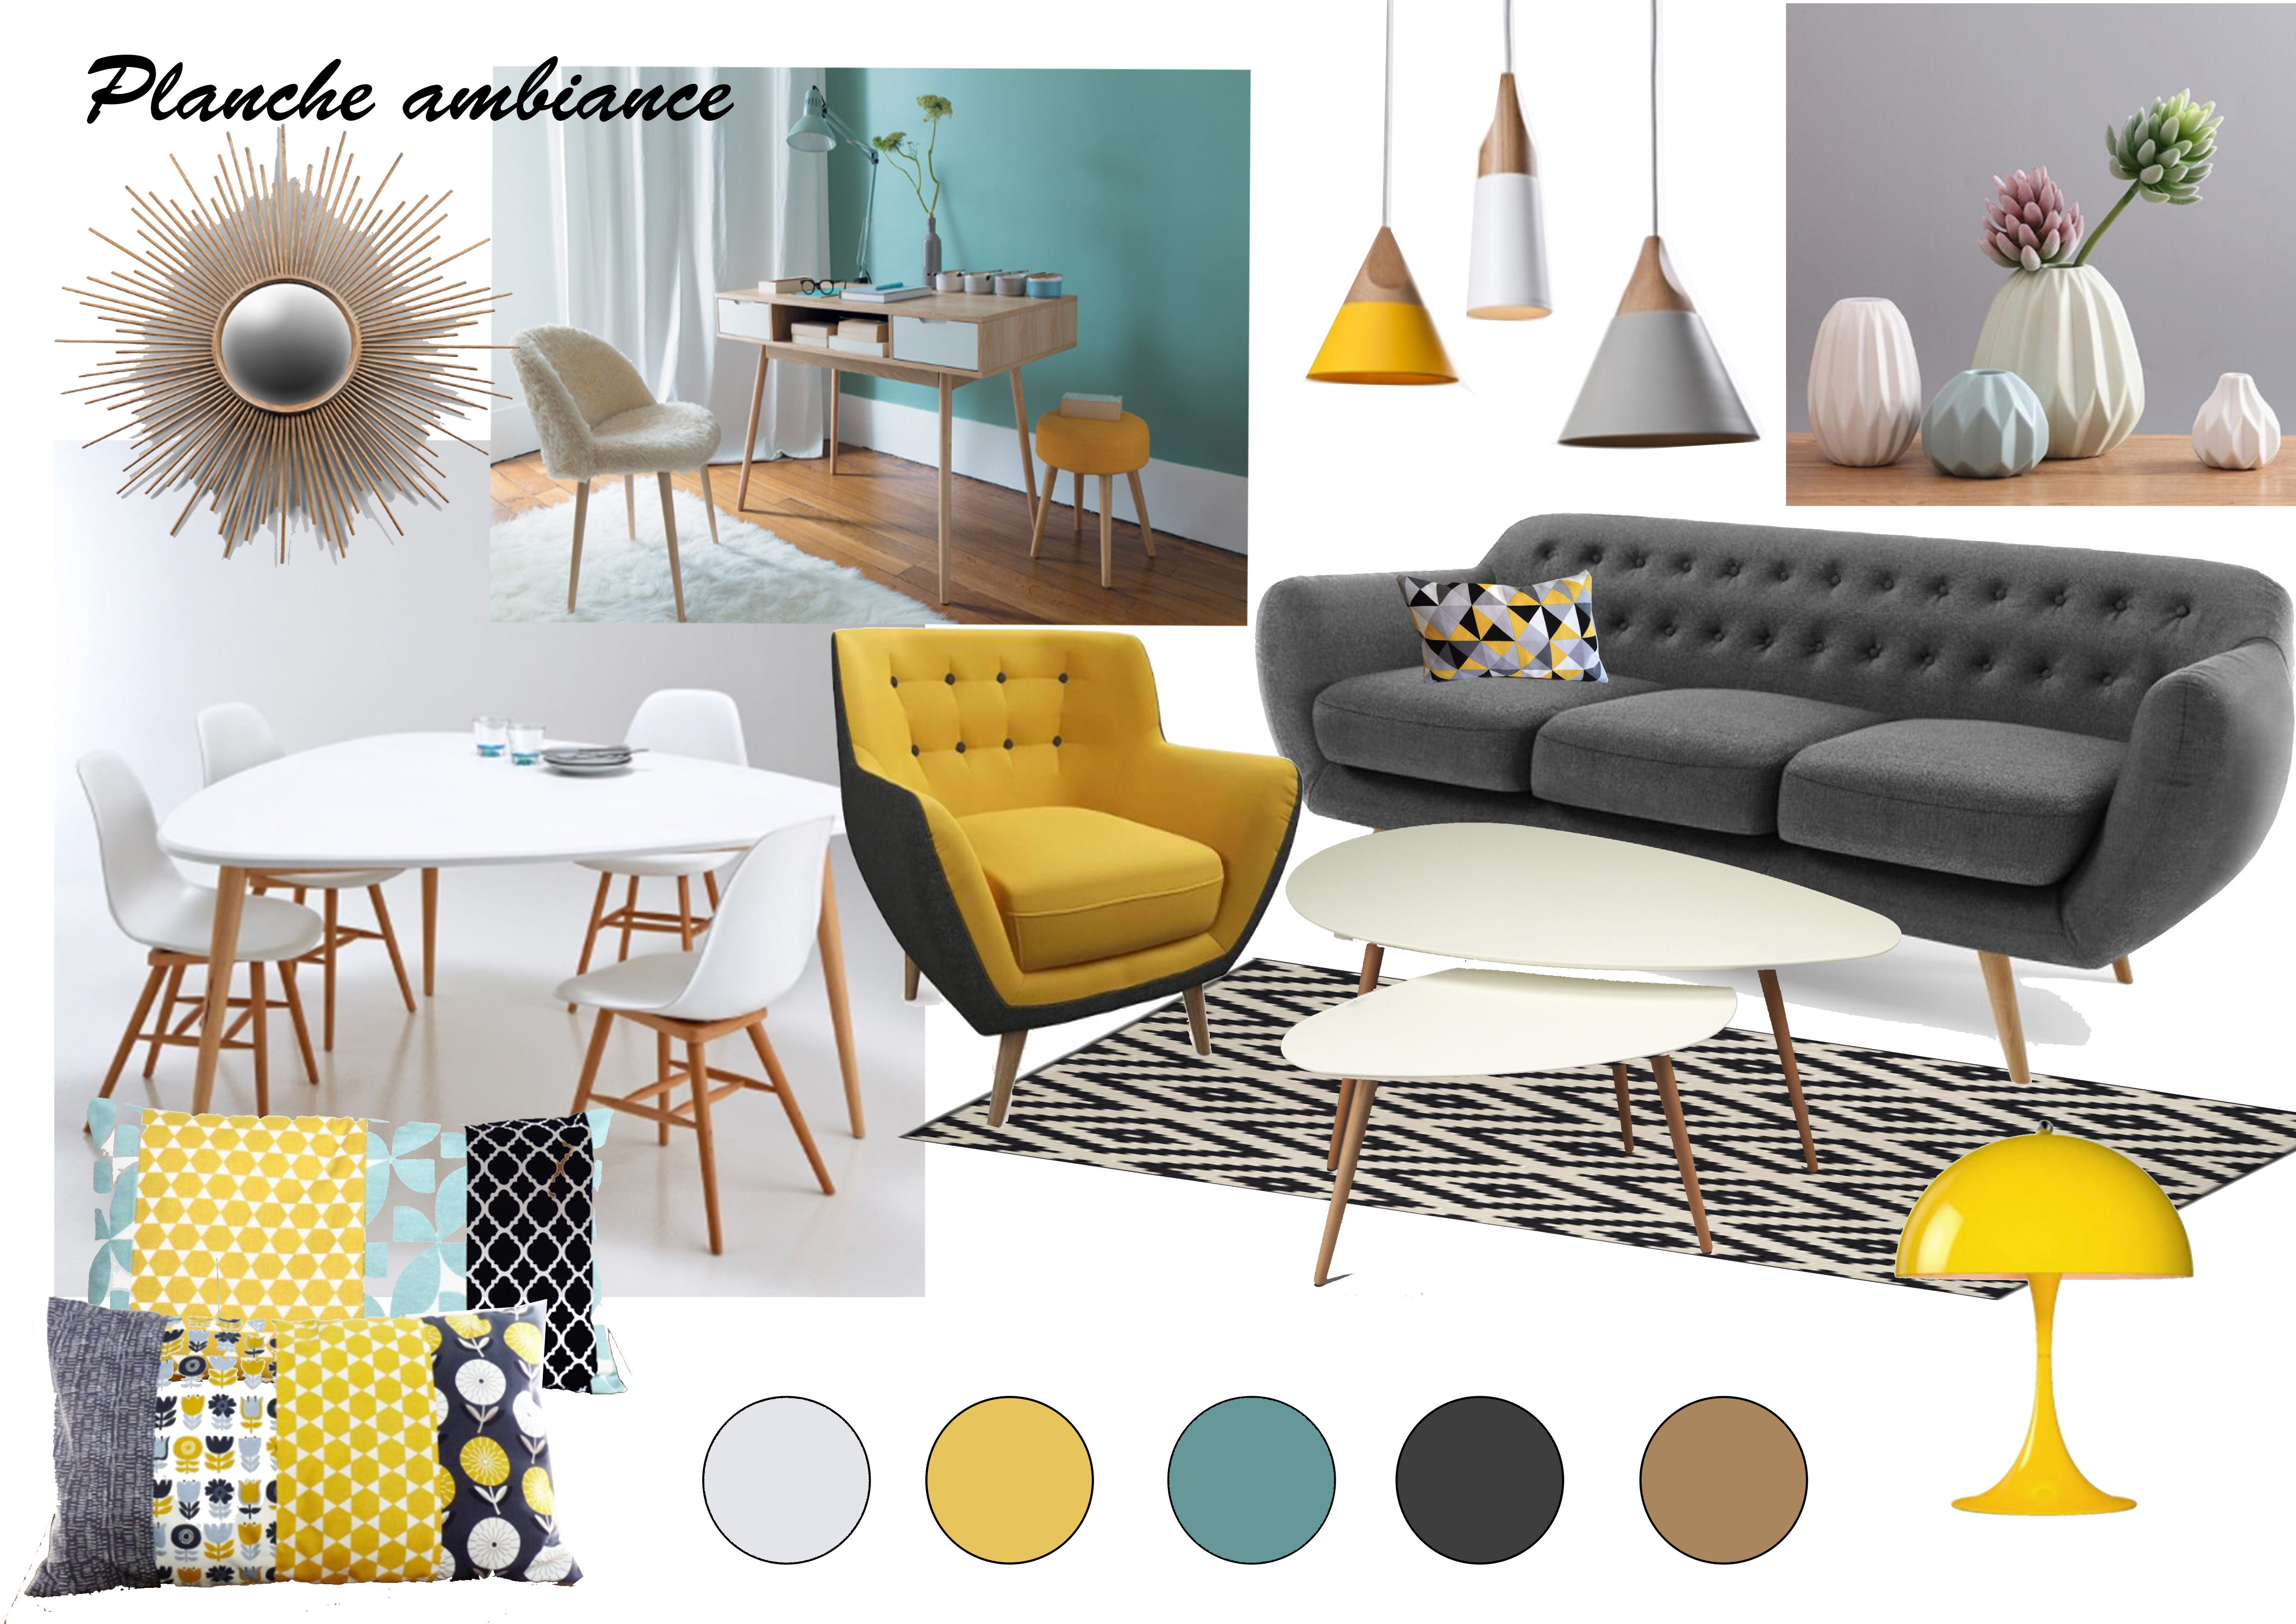 planche d'ambiance style scandinave